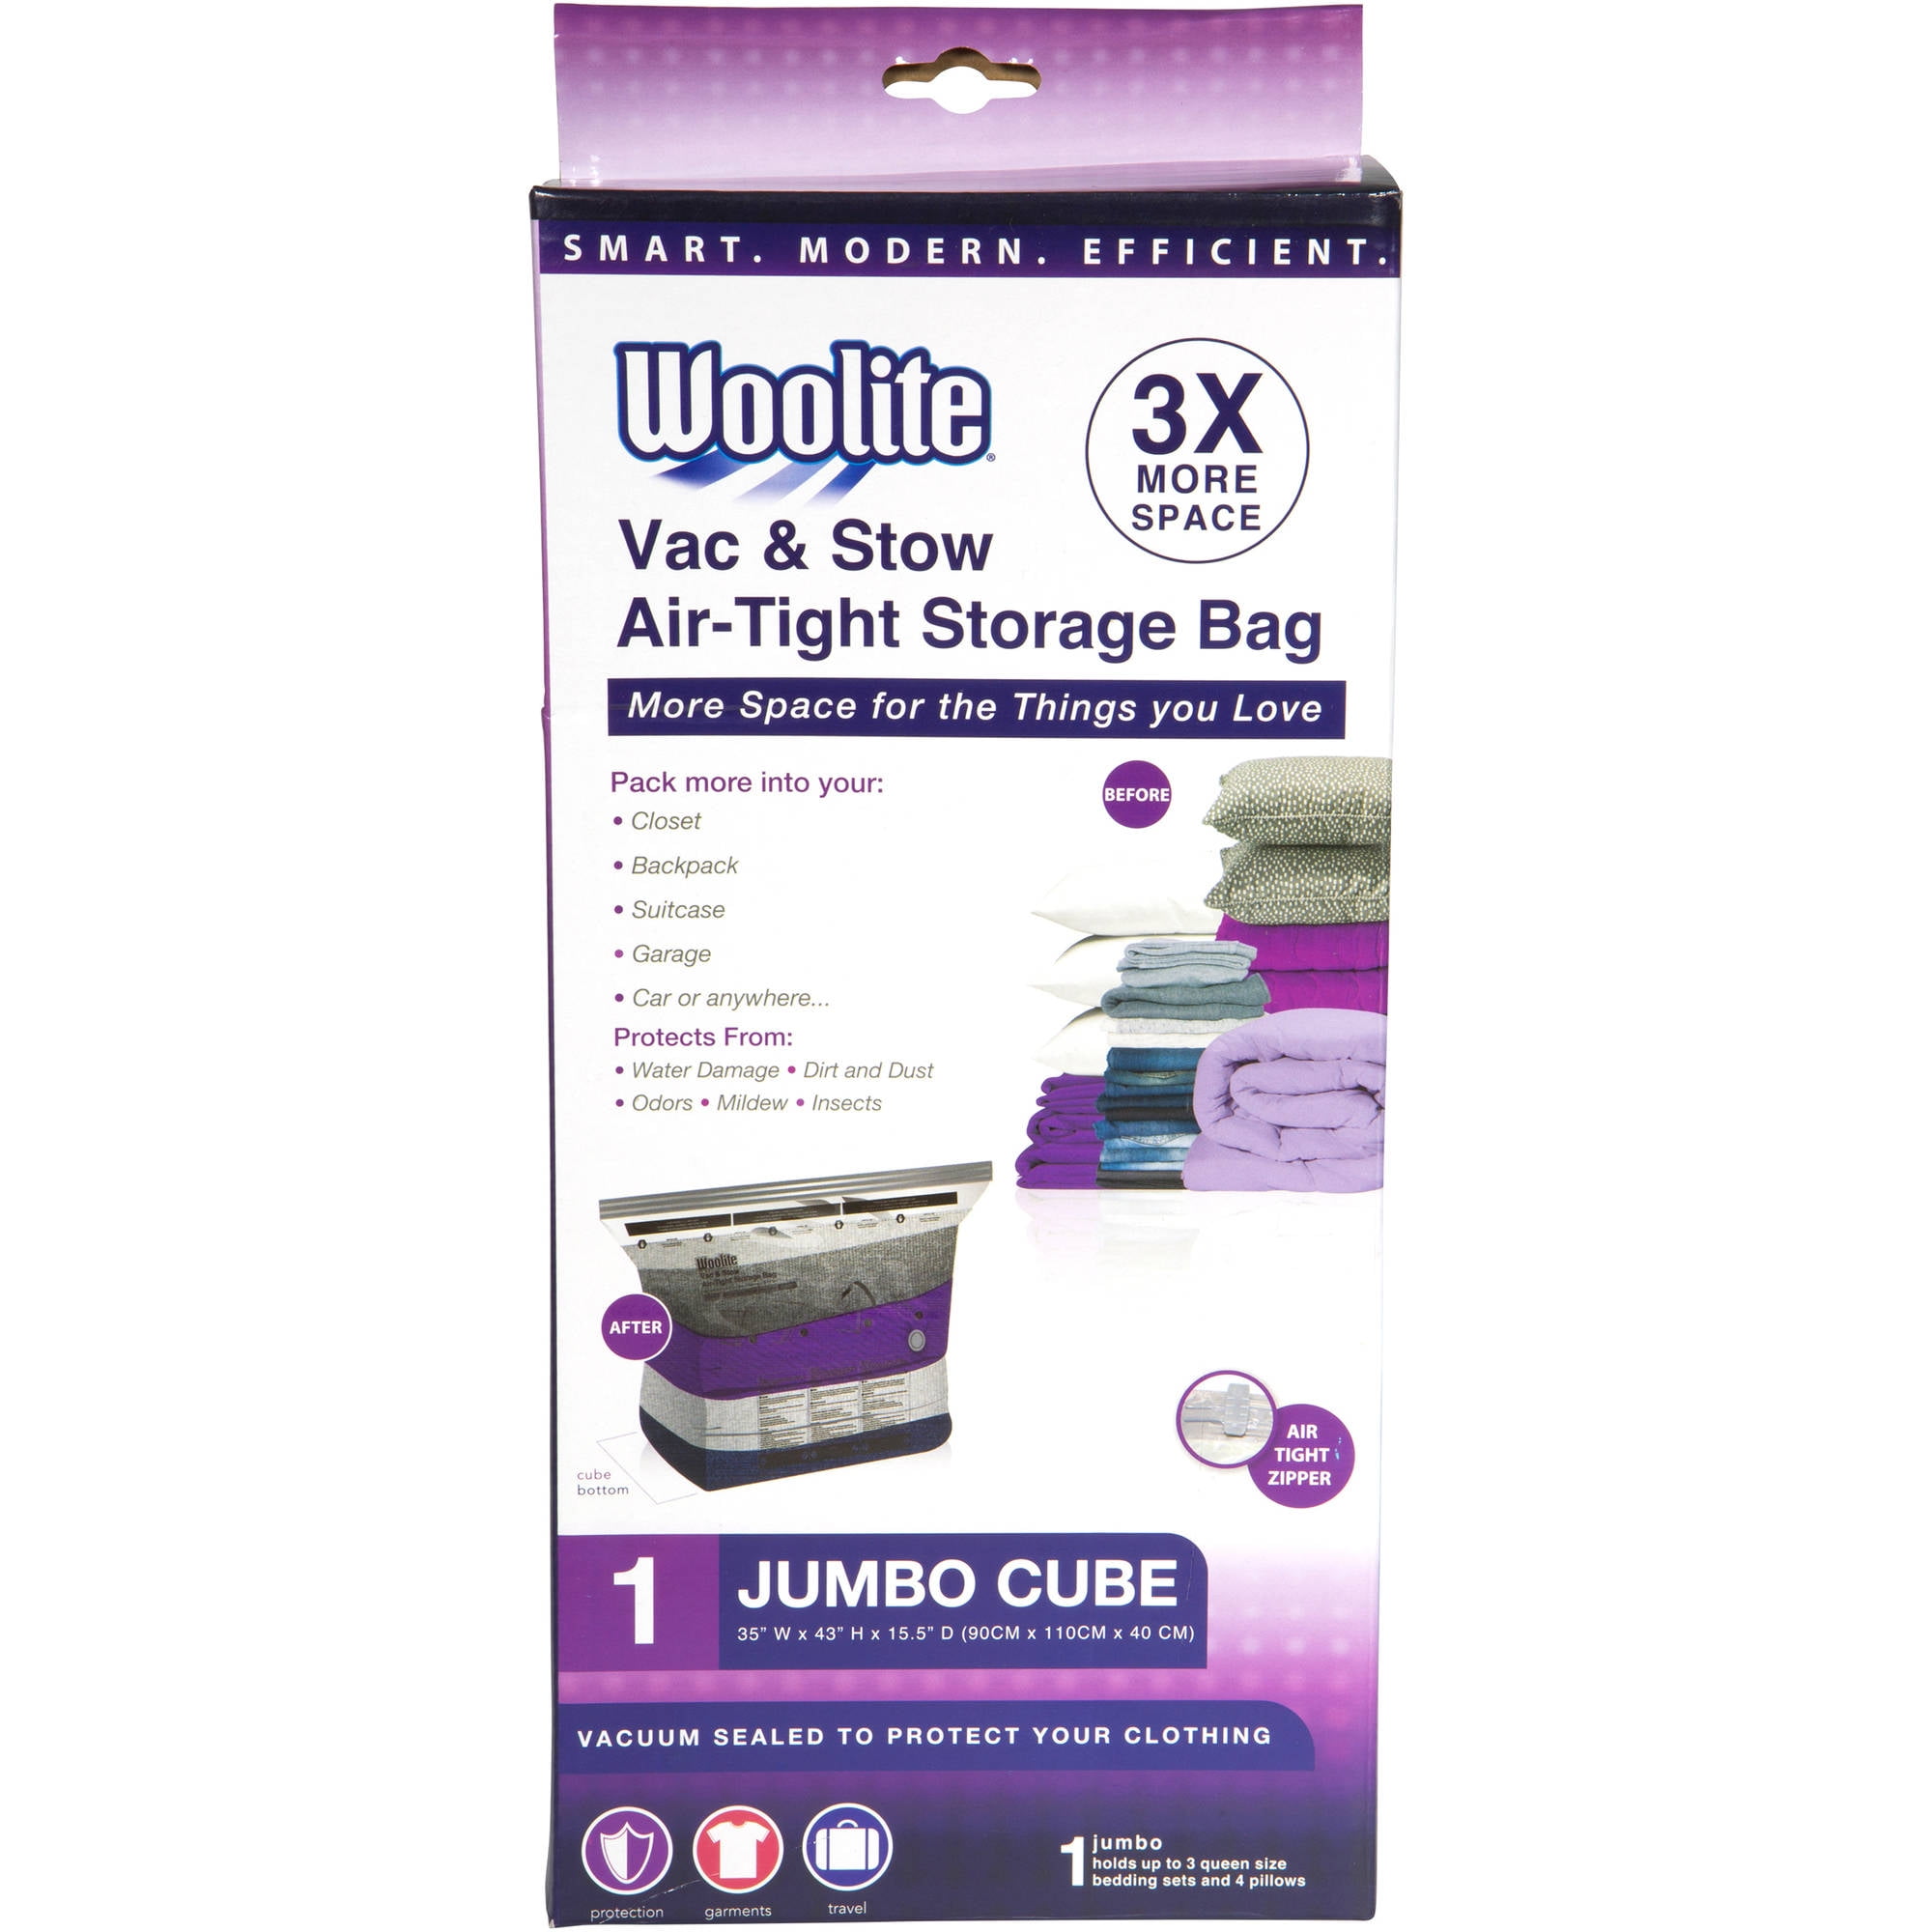 Kennedy ROLL-N-STOW Air Tight Storage Bags - Travel Size